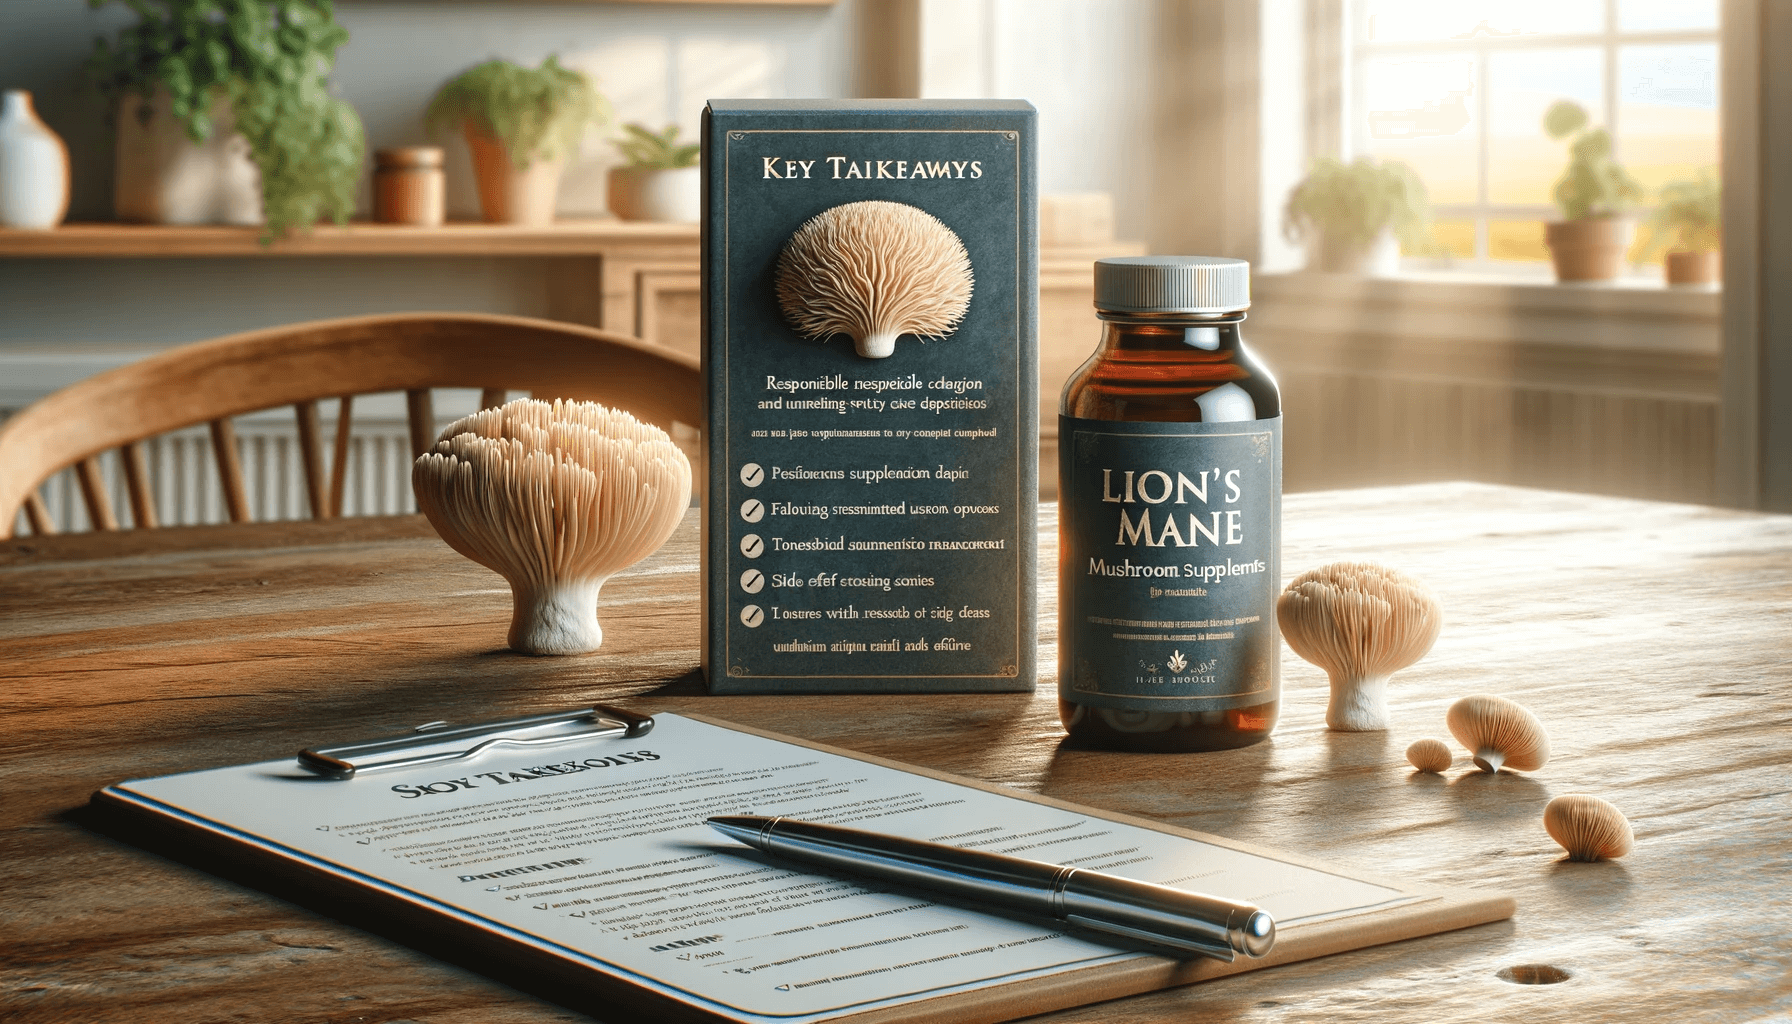 Bottle of Lion's Mane mushroom supplements with a summary of key takeaways on responsible usage and side effect management